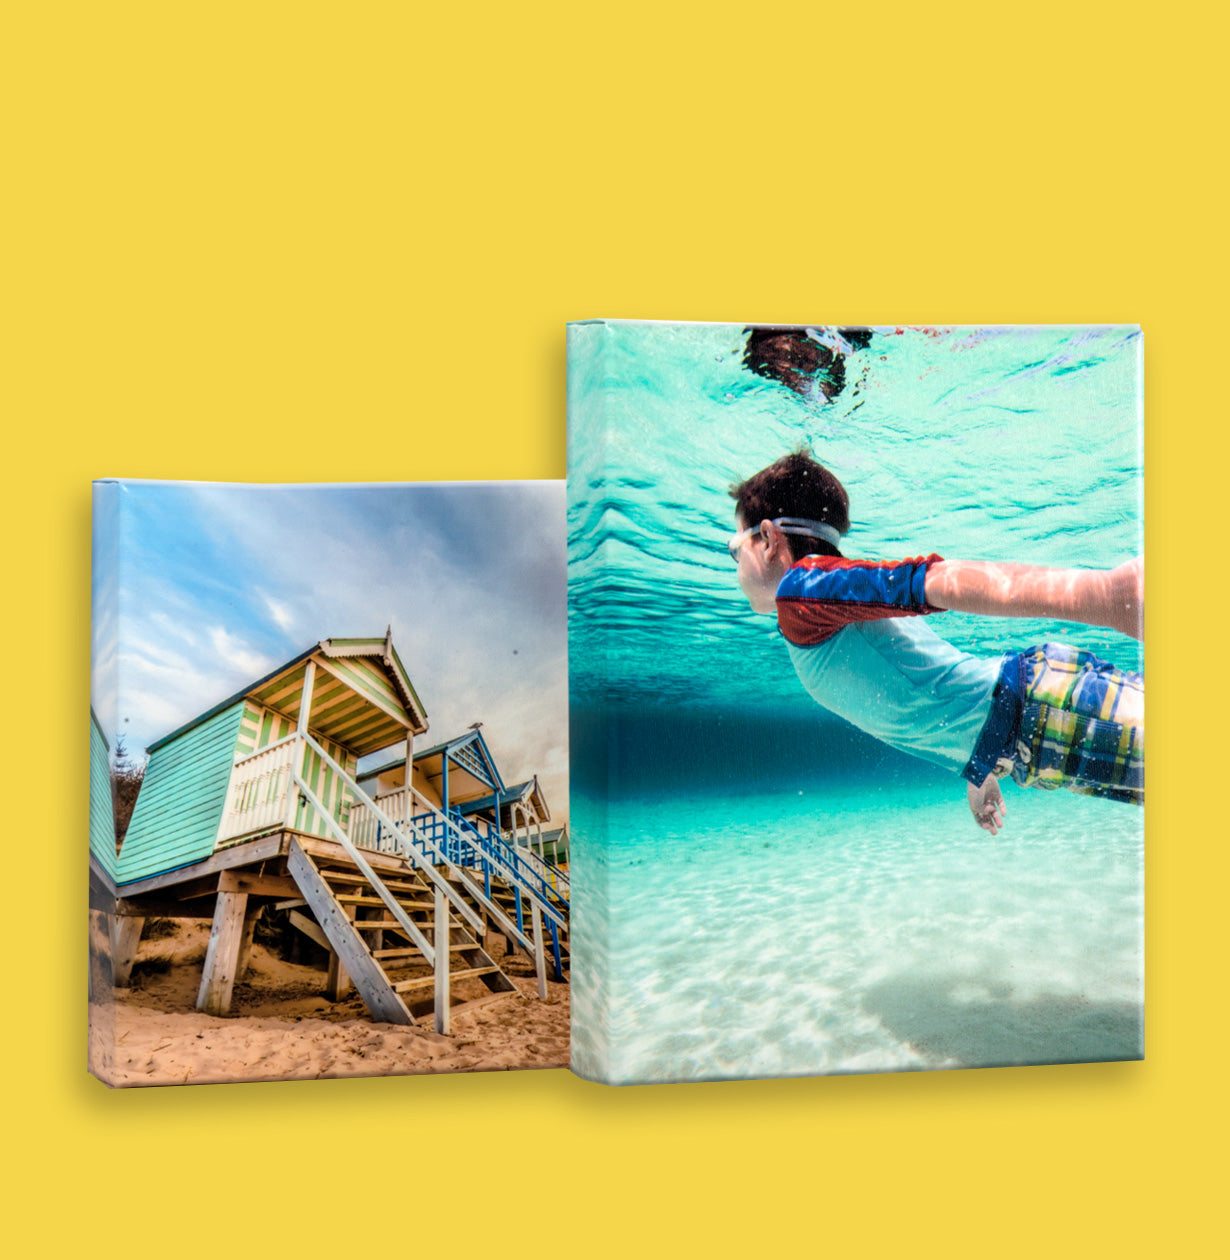 Underwater photo and beach image printed on canvas by Posterjack